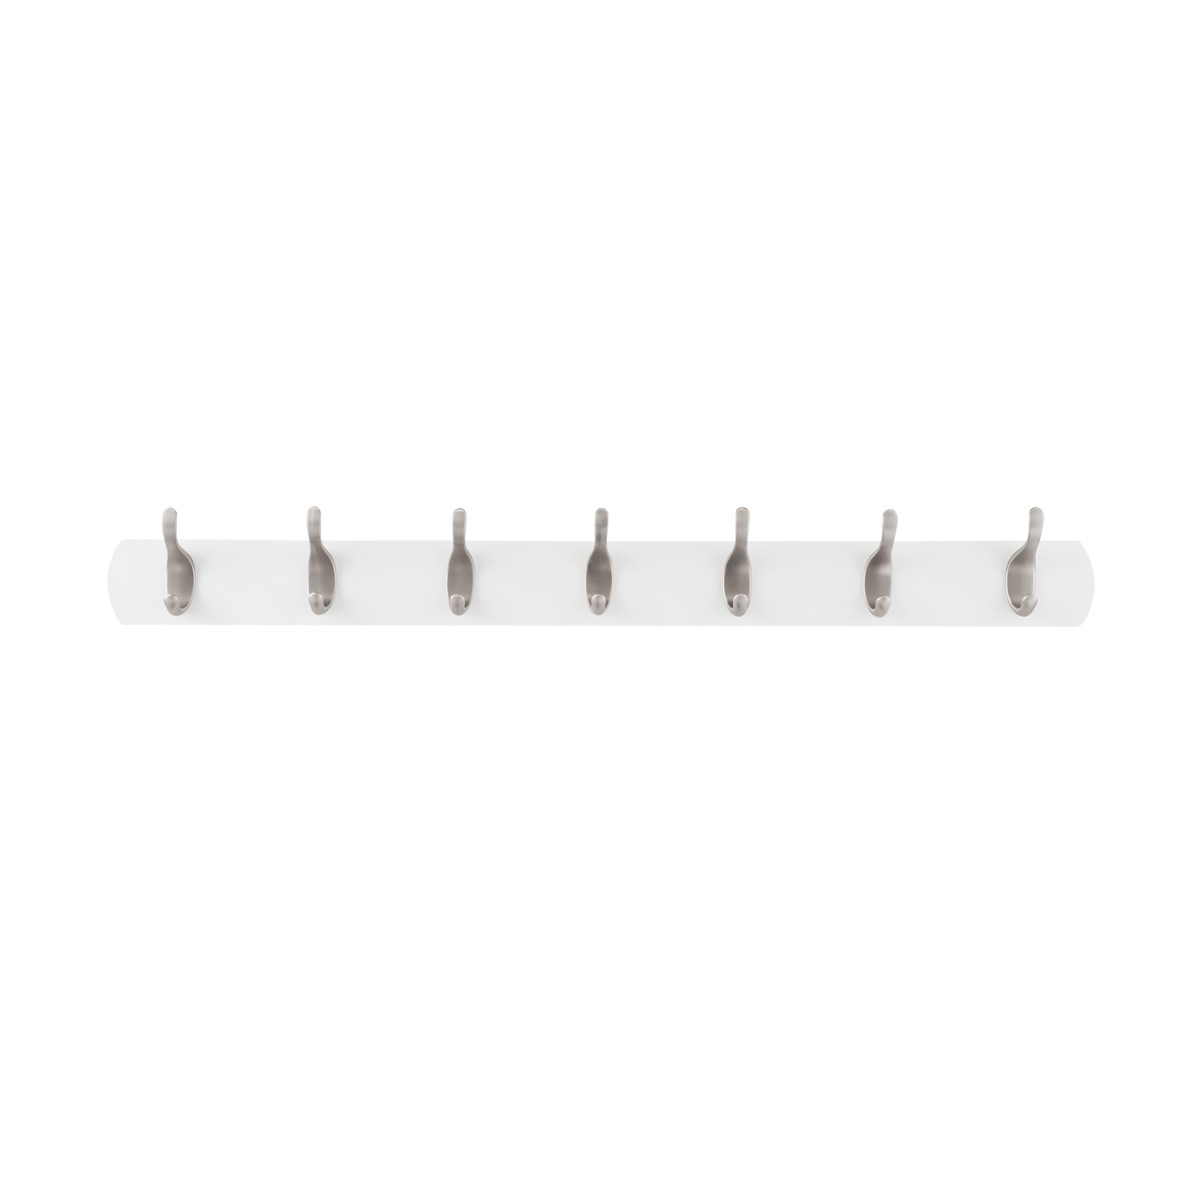 Umbra White 7-Hook Wave Rack | The Container Store